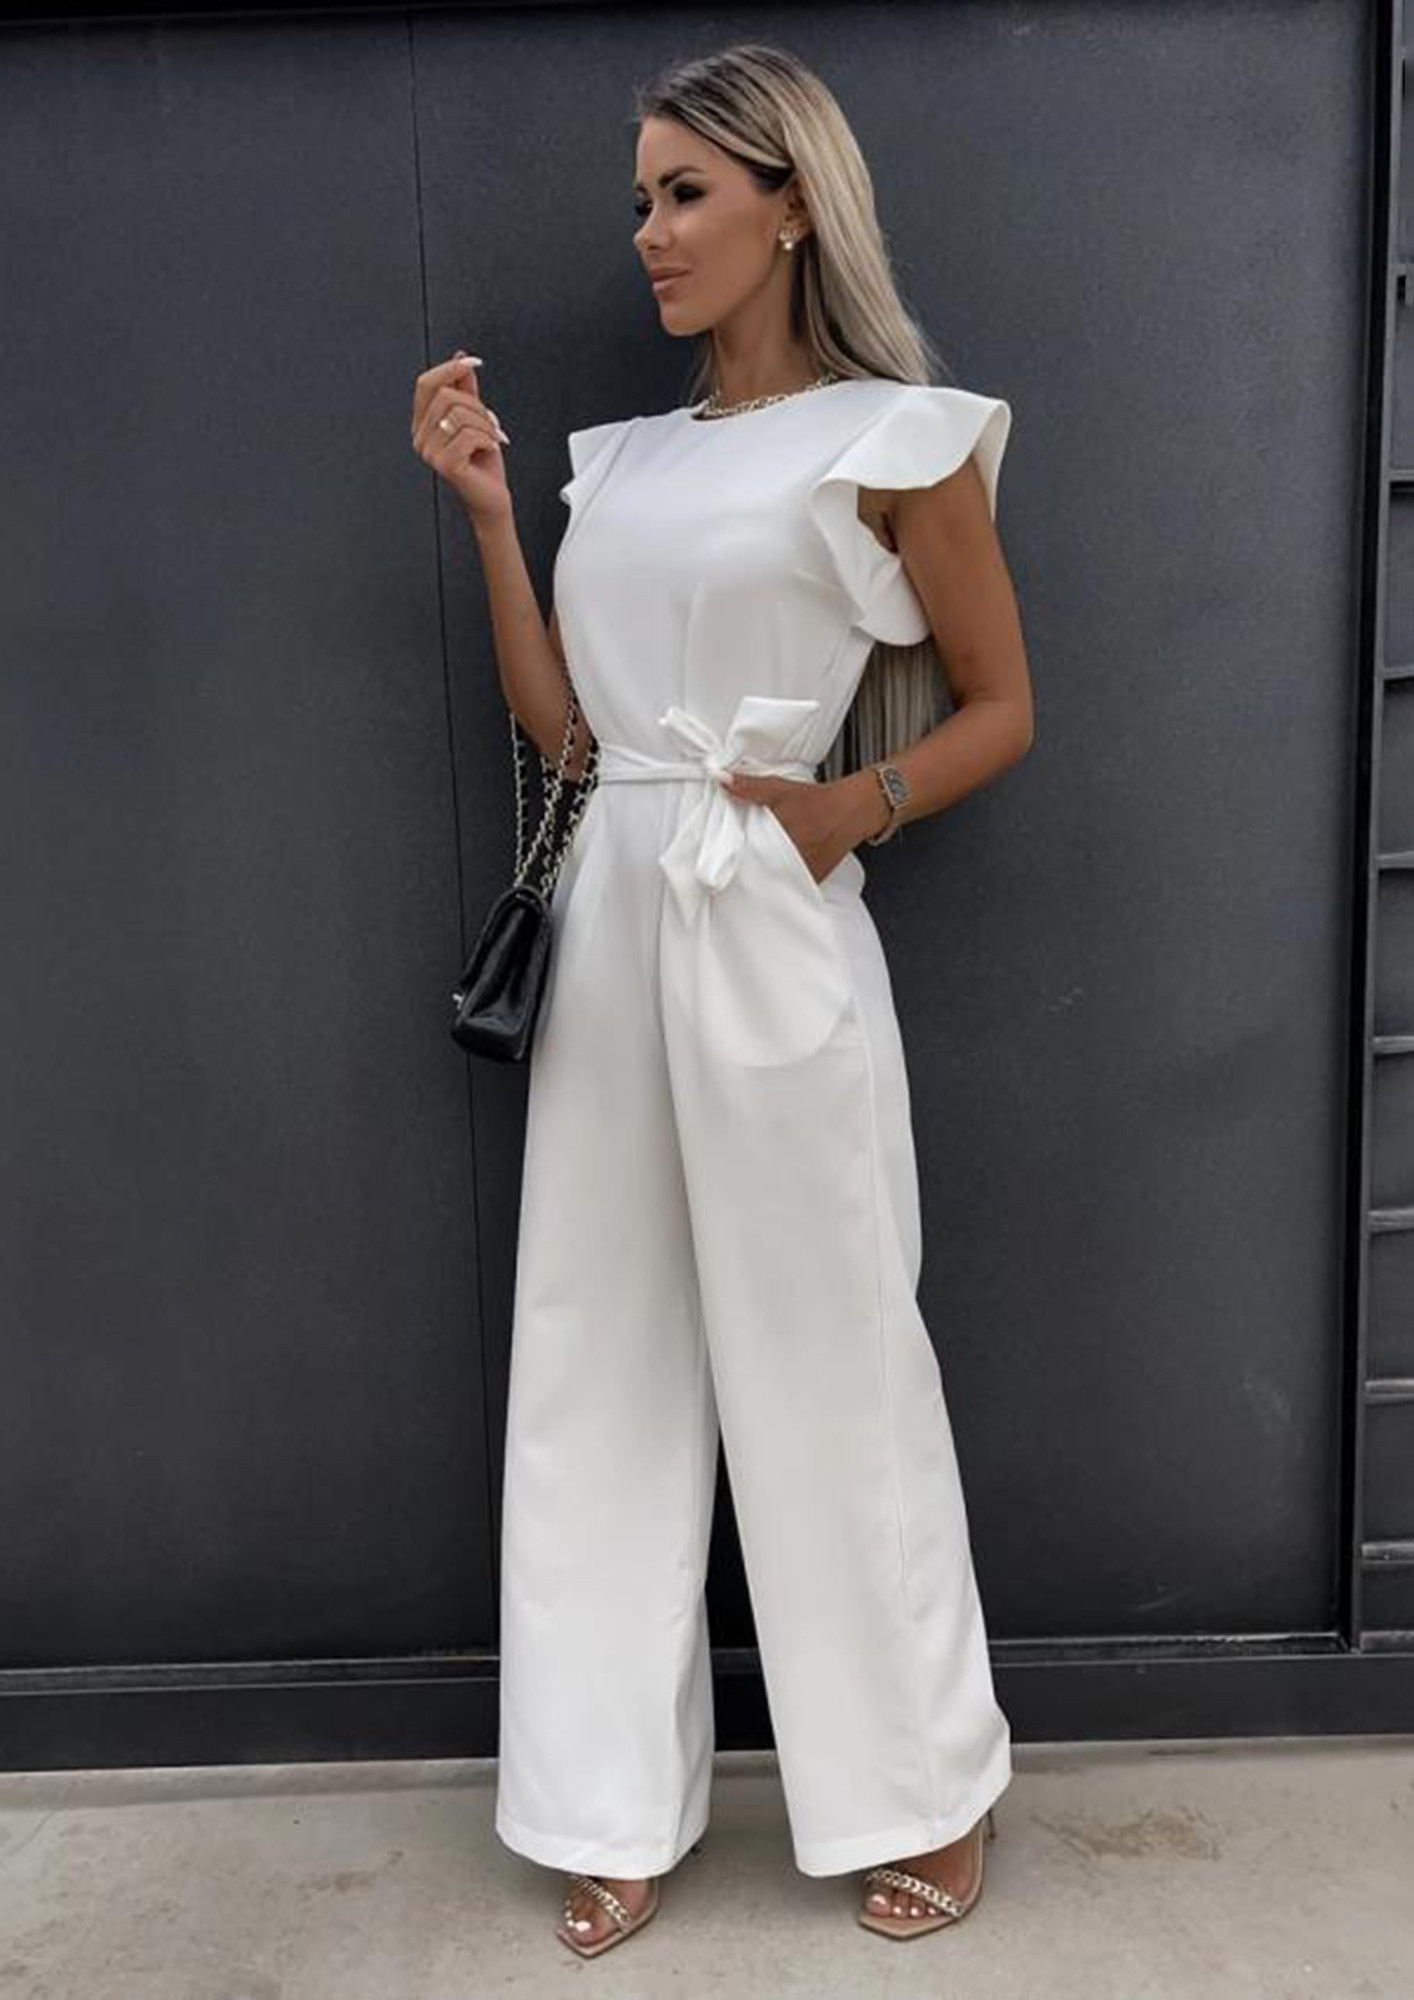 White Deep V Neck Long Sleeve Skinny Jumpsuits Sexy Tight Club Party Lady  Fashion Bodysuits High Street Outfits  Jumpsuits  AliExpress